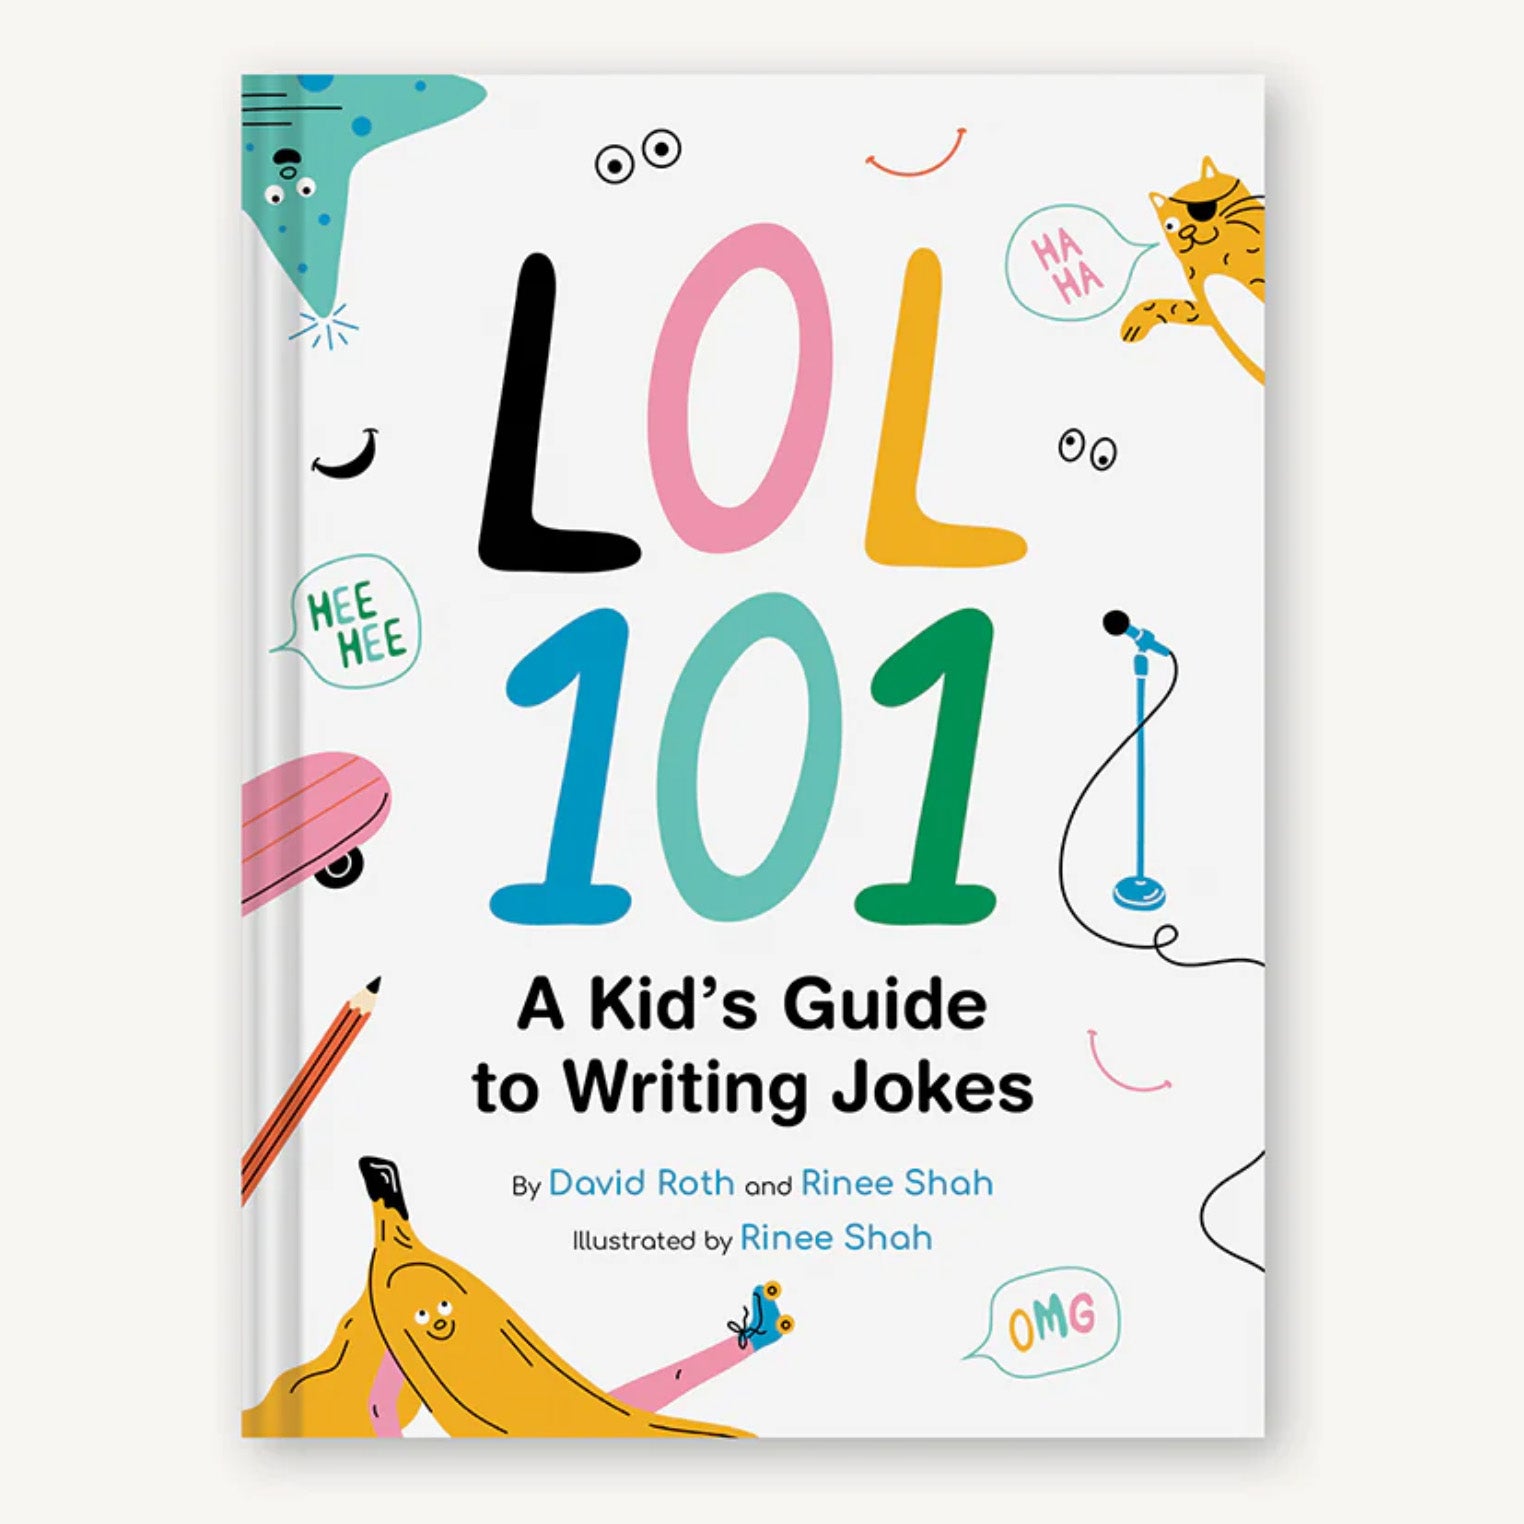 lol 101: a kid's guide to writing jokes